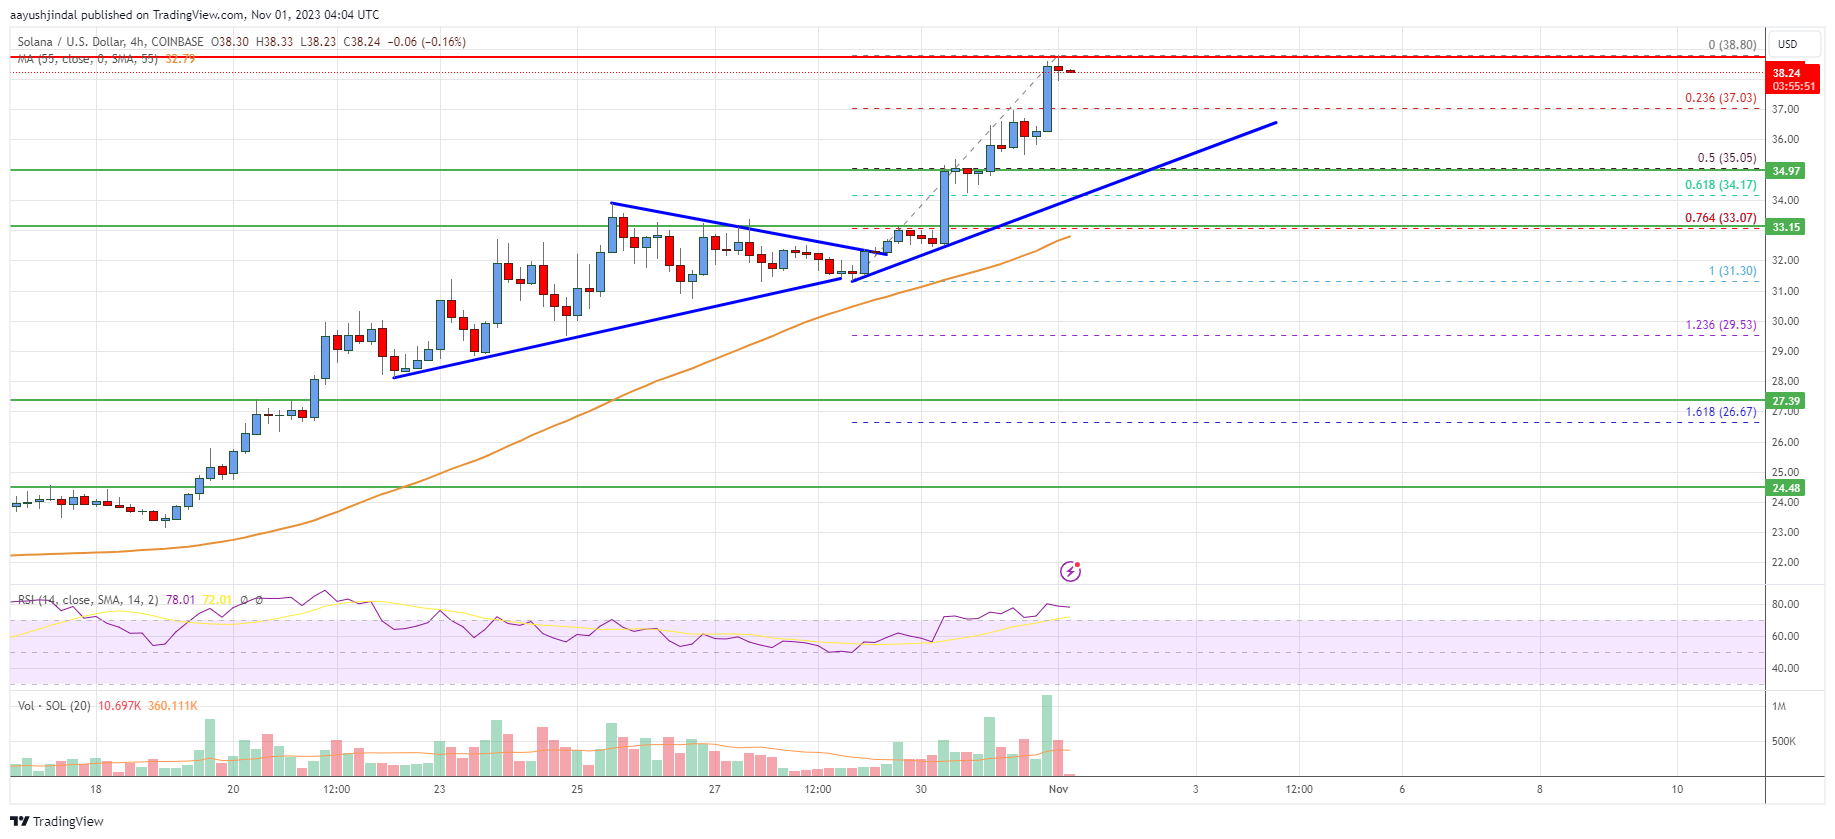 Solana (SOL) Price Analysis: Rally Could Extend To $40